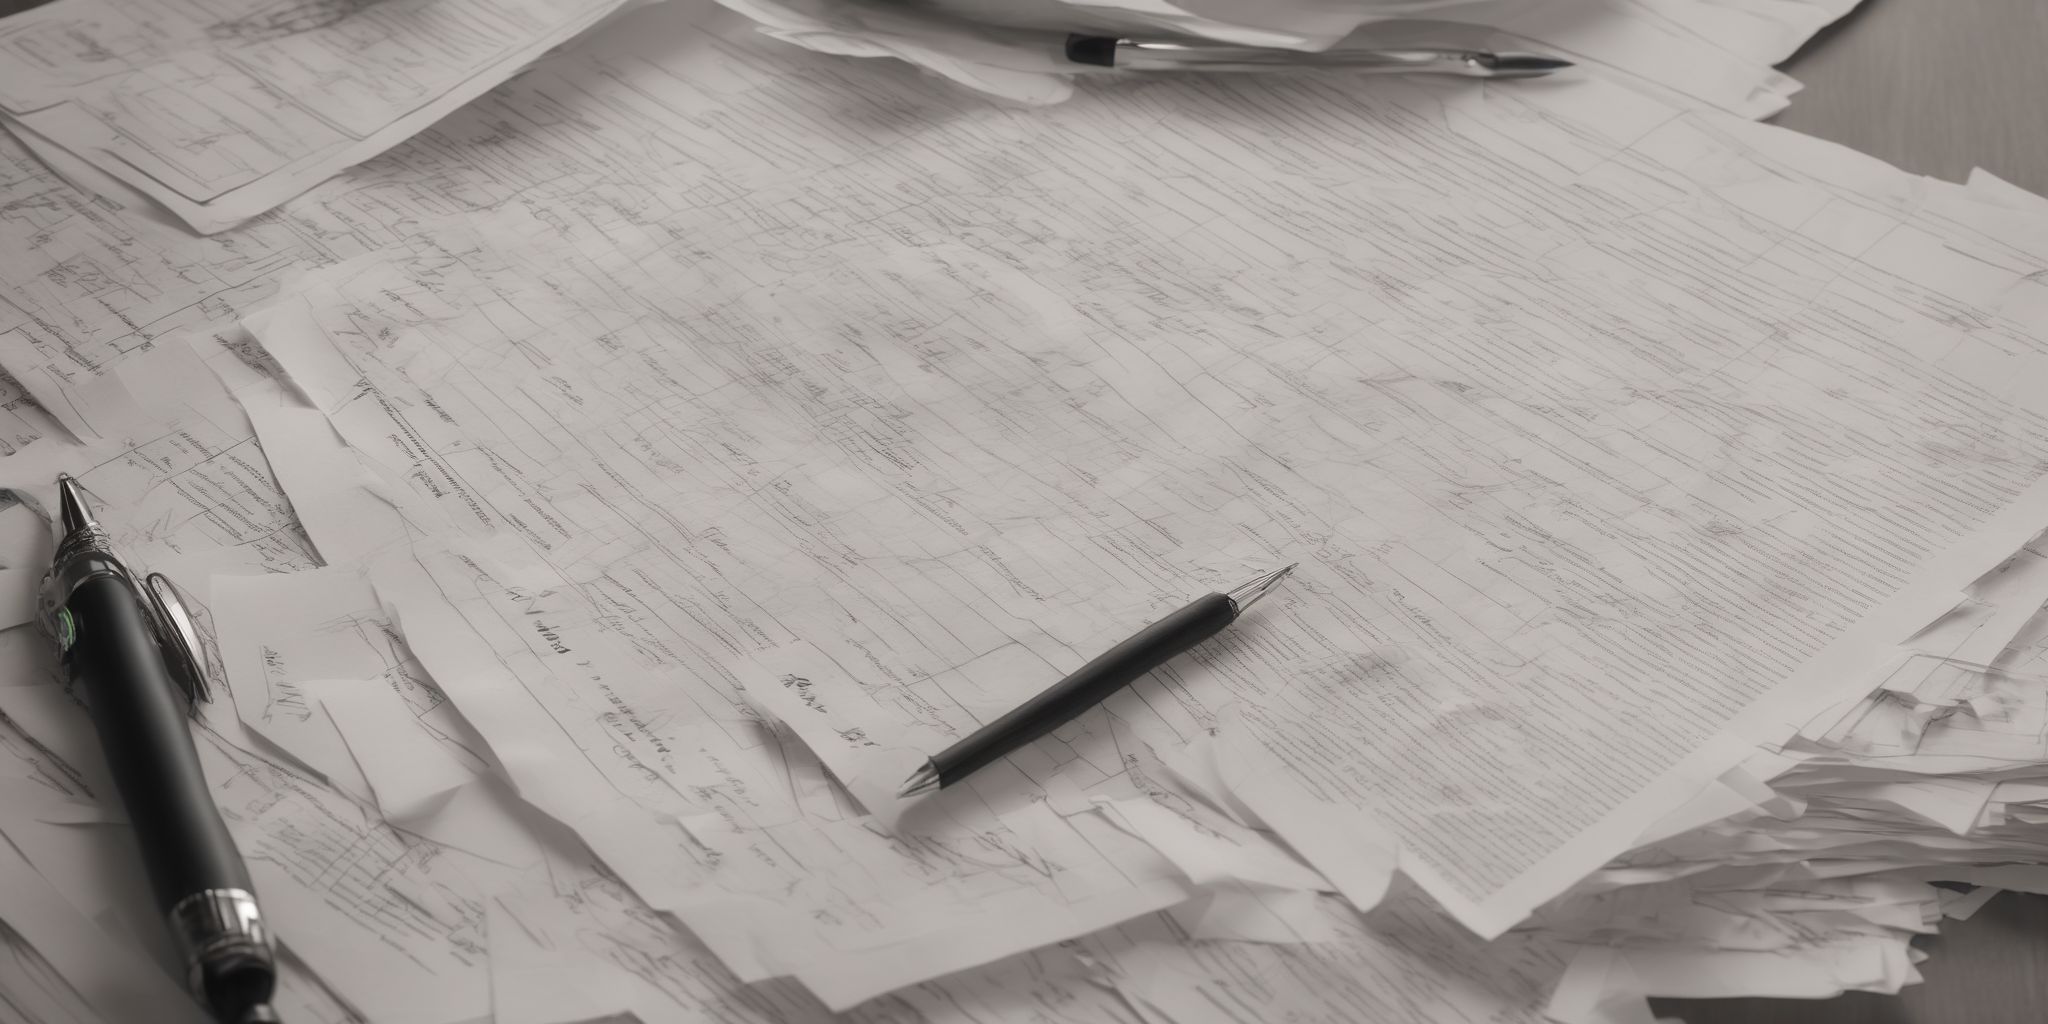 Paperless contract  in realistic, photographic style